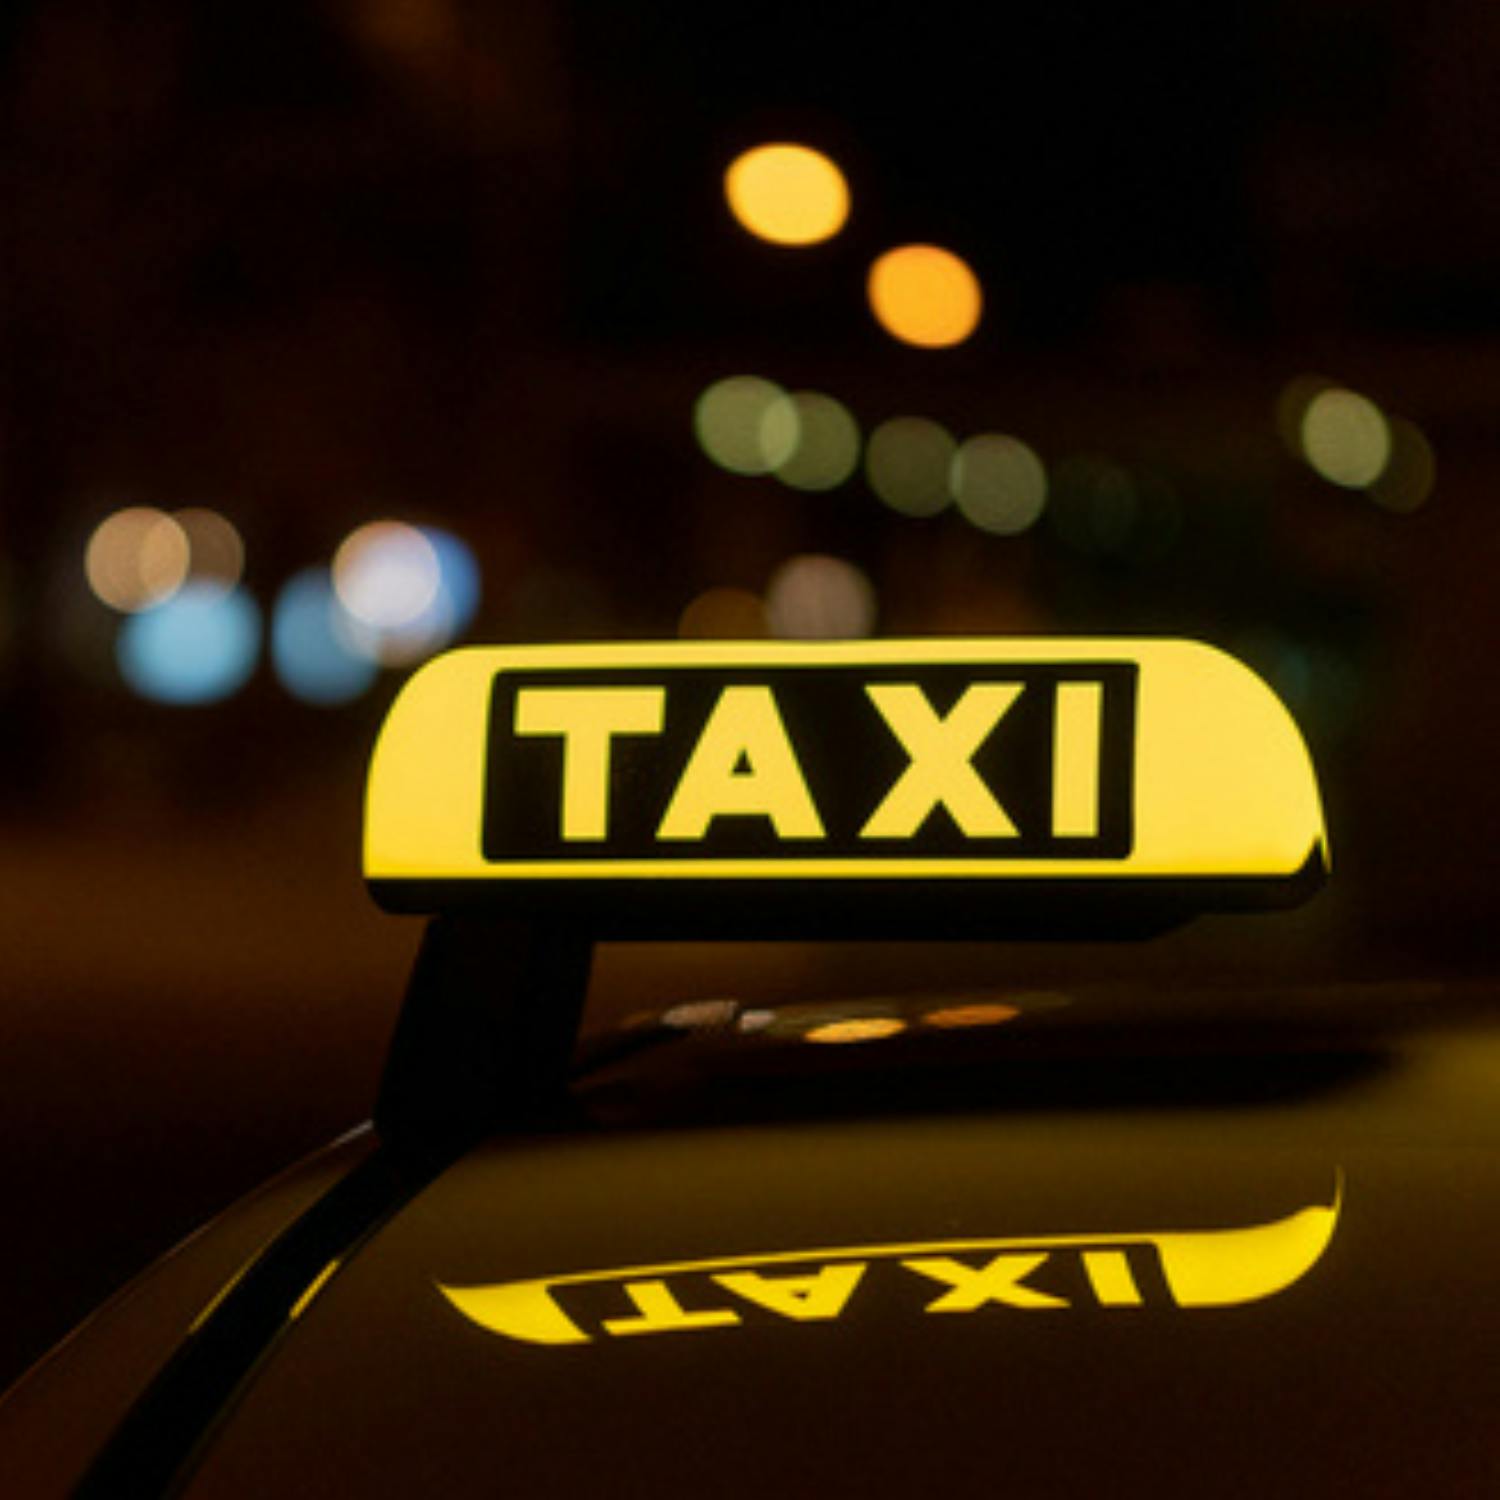 Why are there fewer taxis across the country than in 2019?